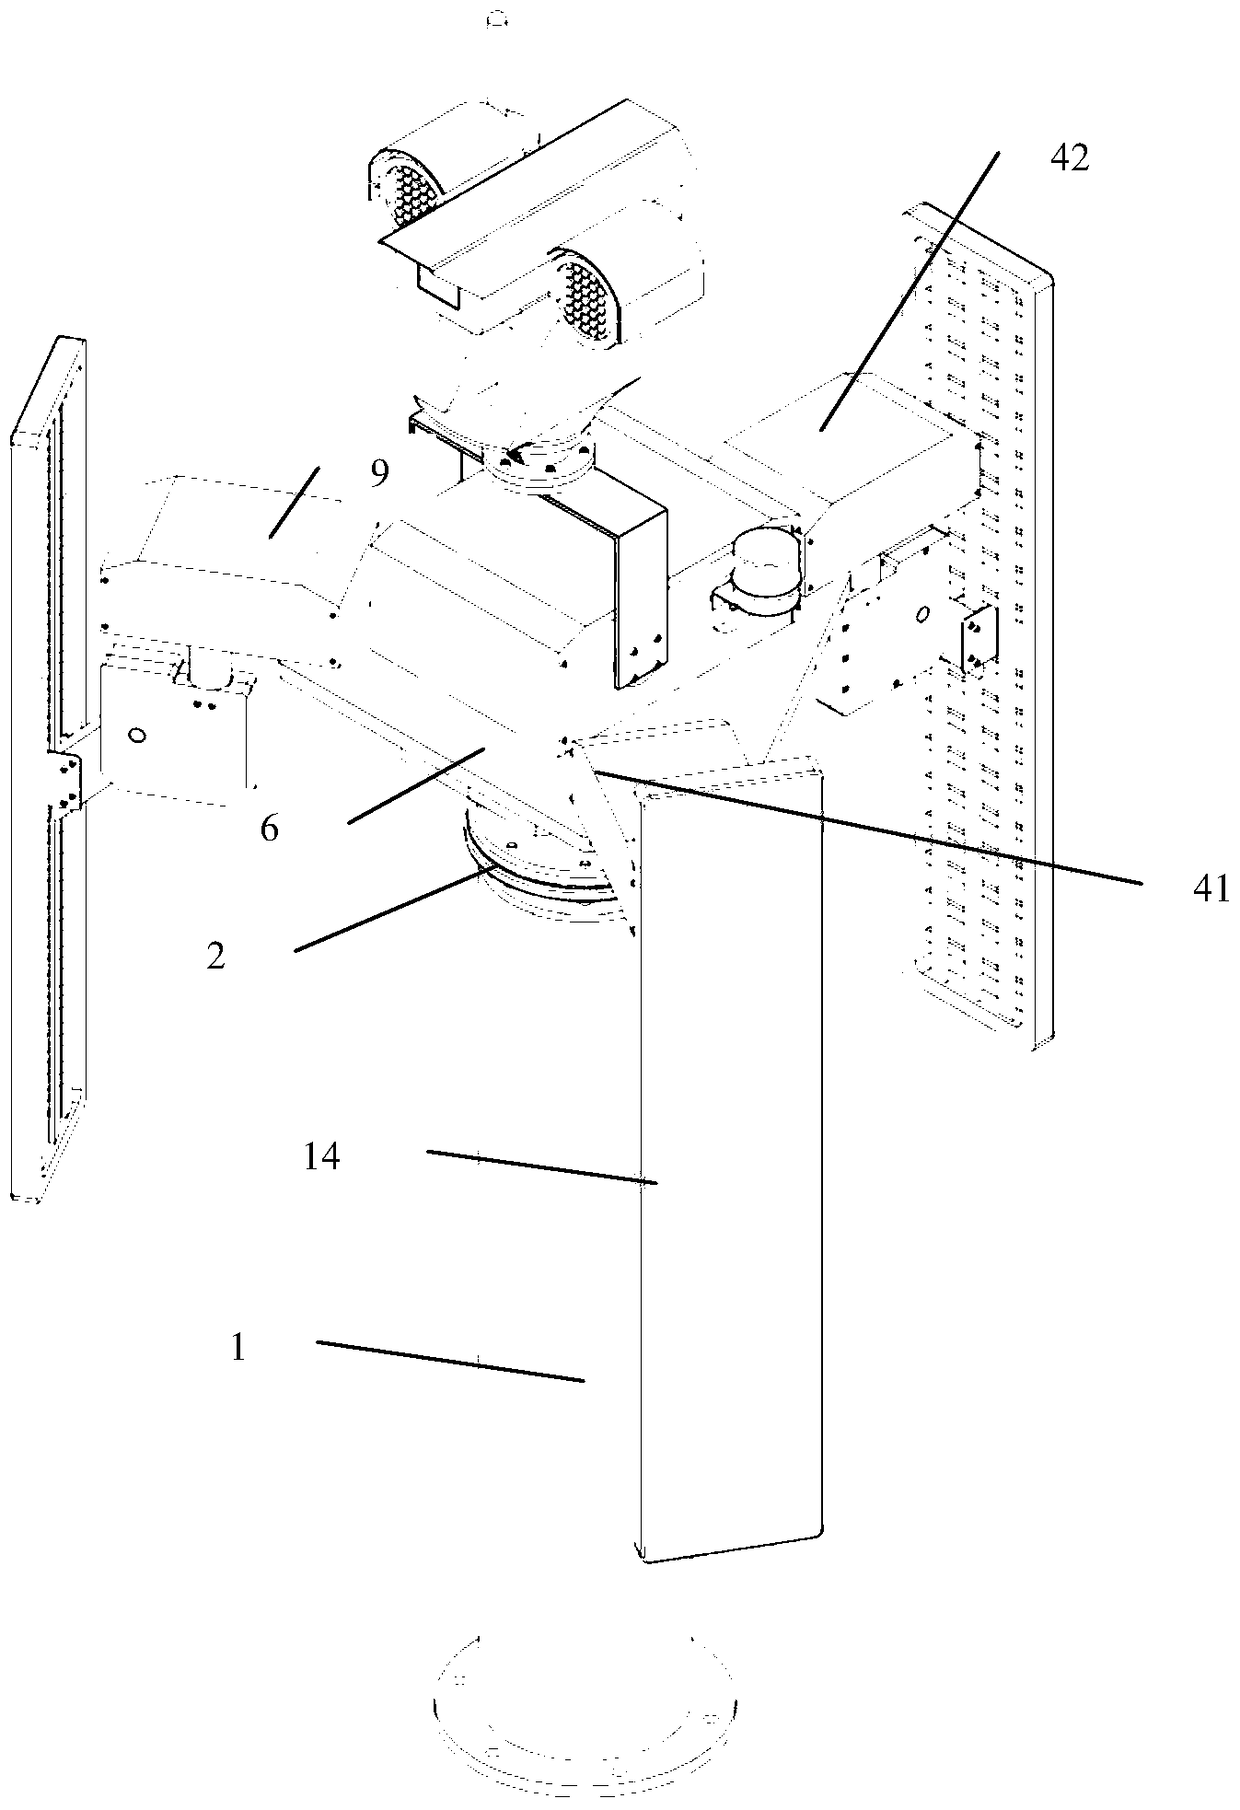 A Supporting Mechanism for Multi-Surface Directional Antenna with Adjustable Angle